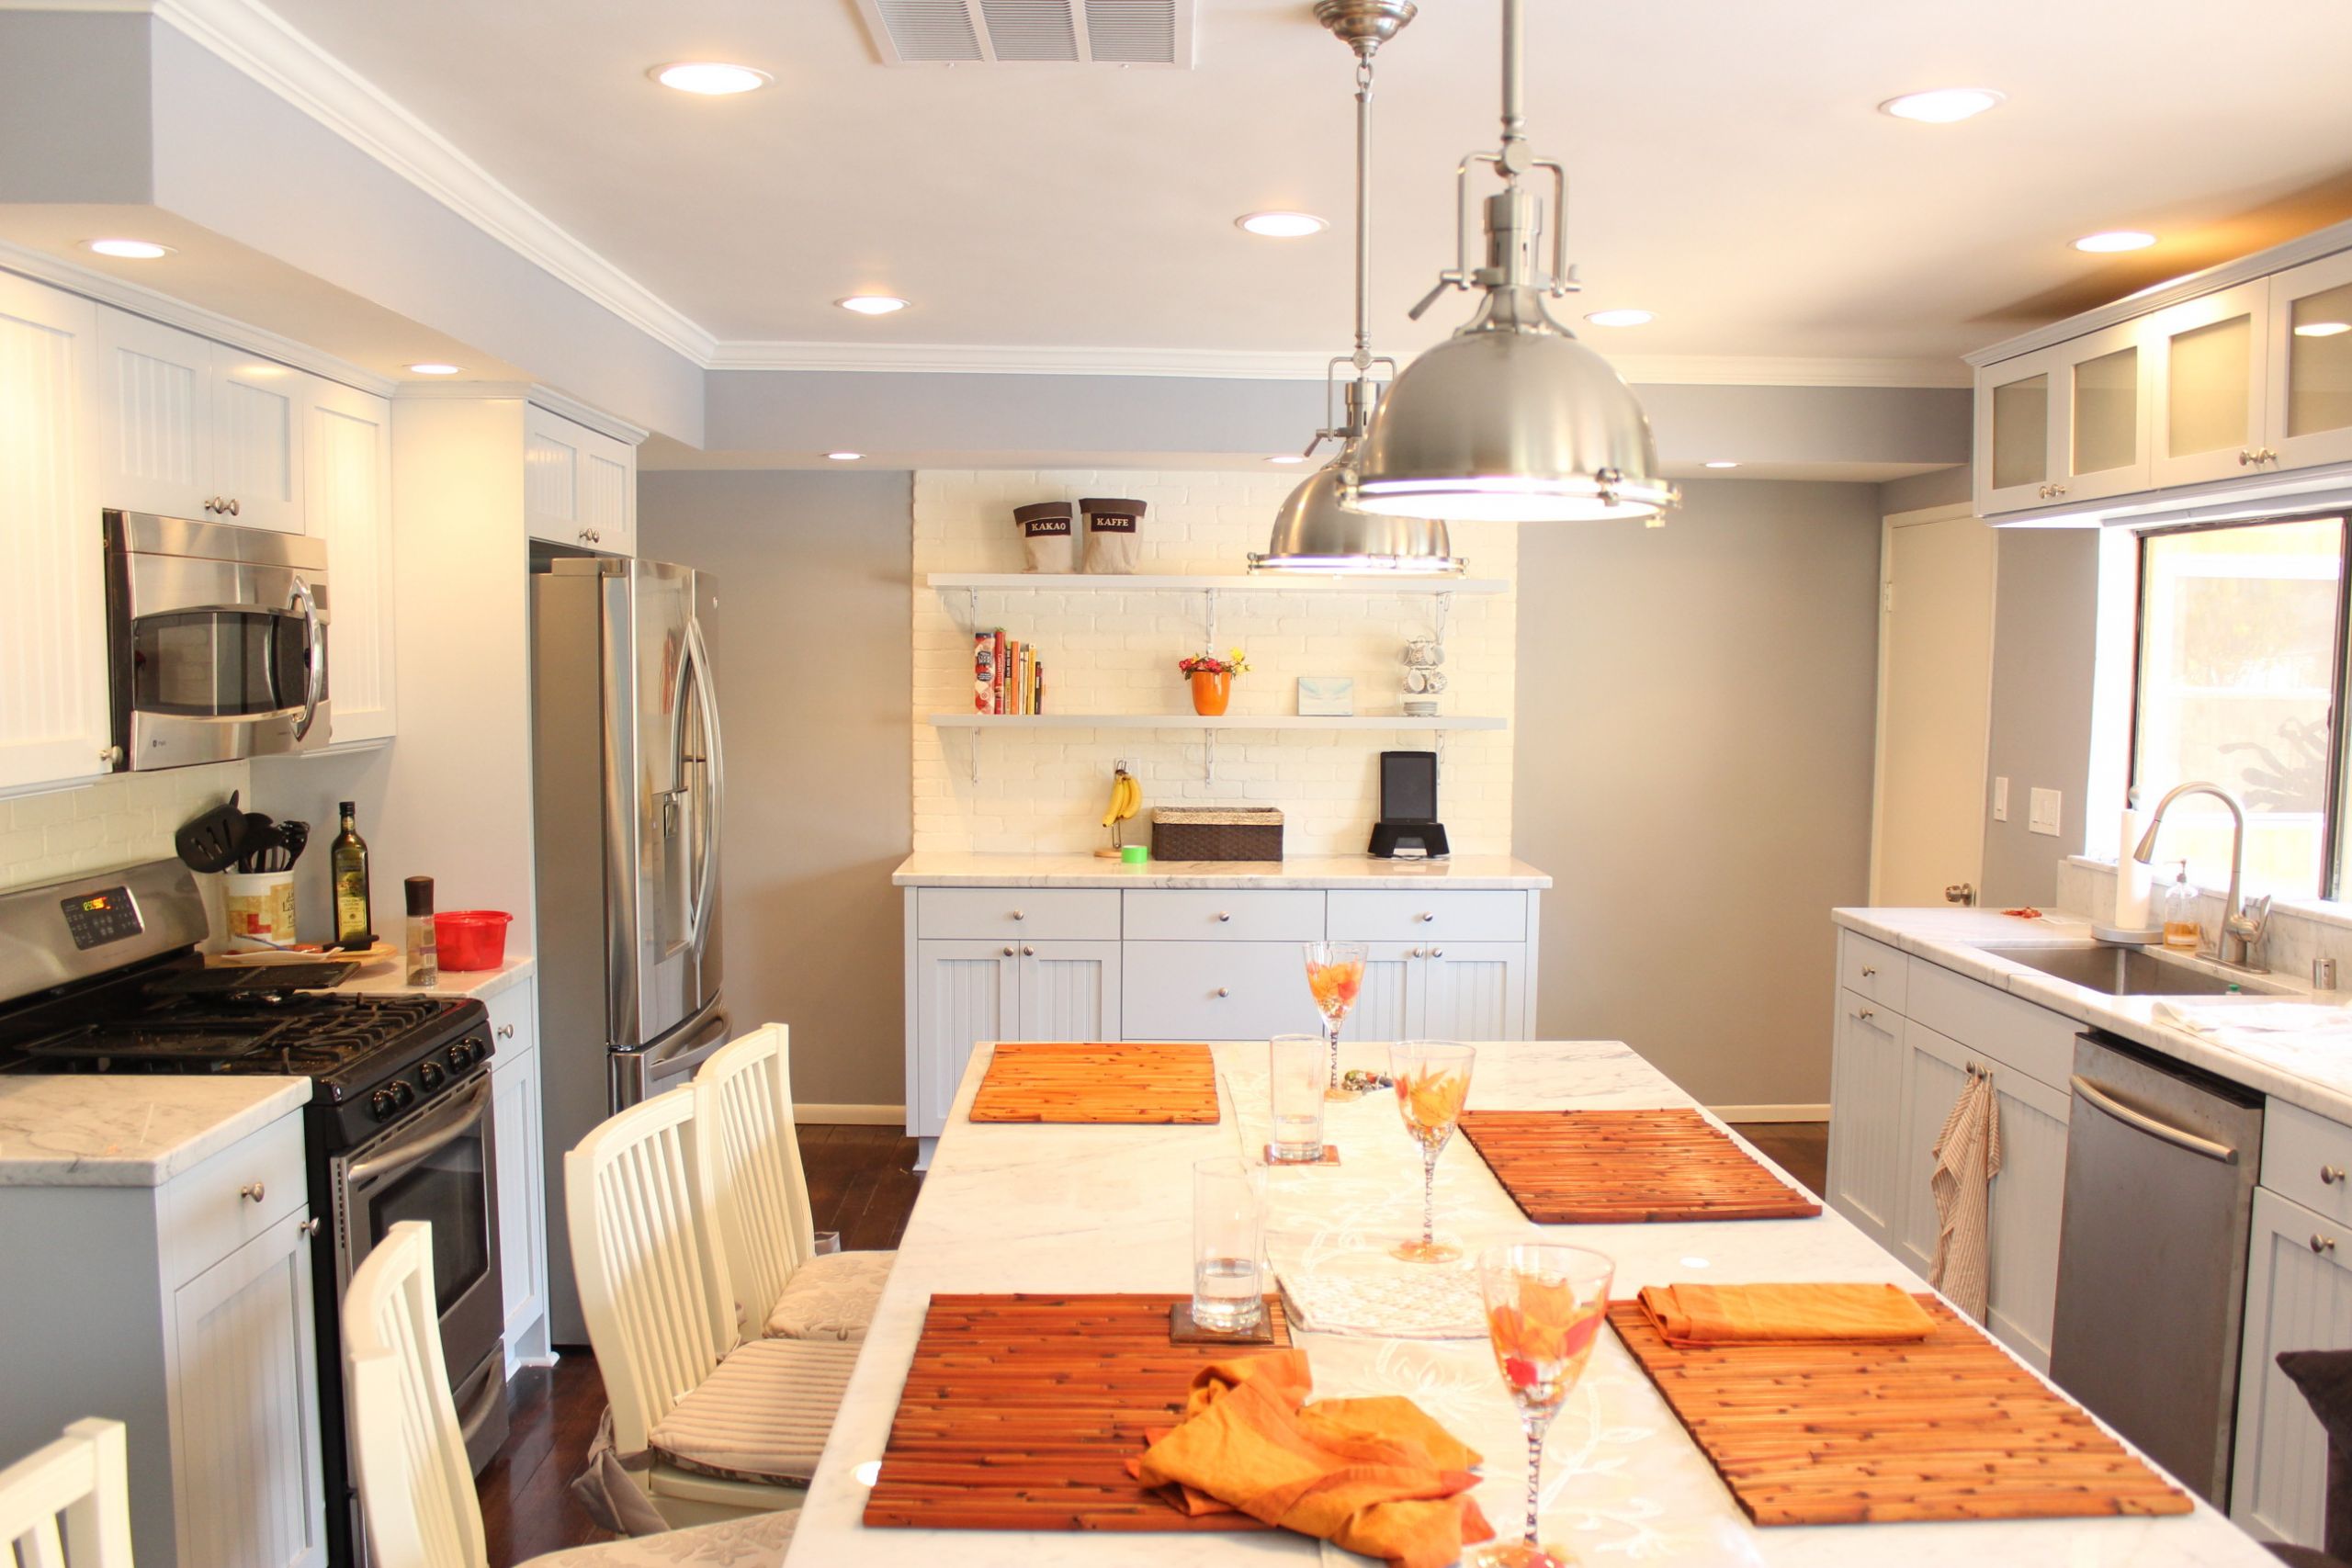 Kitchen Remodeling Los Angeles
 Small Kitchen Remodel Kitchen Remodeler Los Angeles